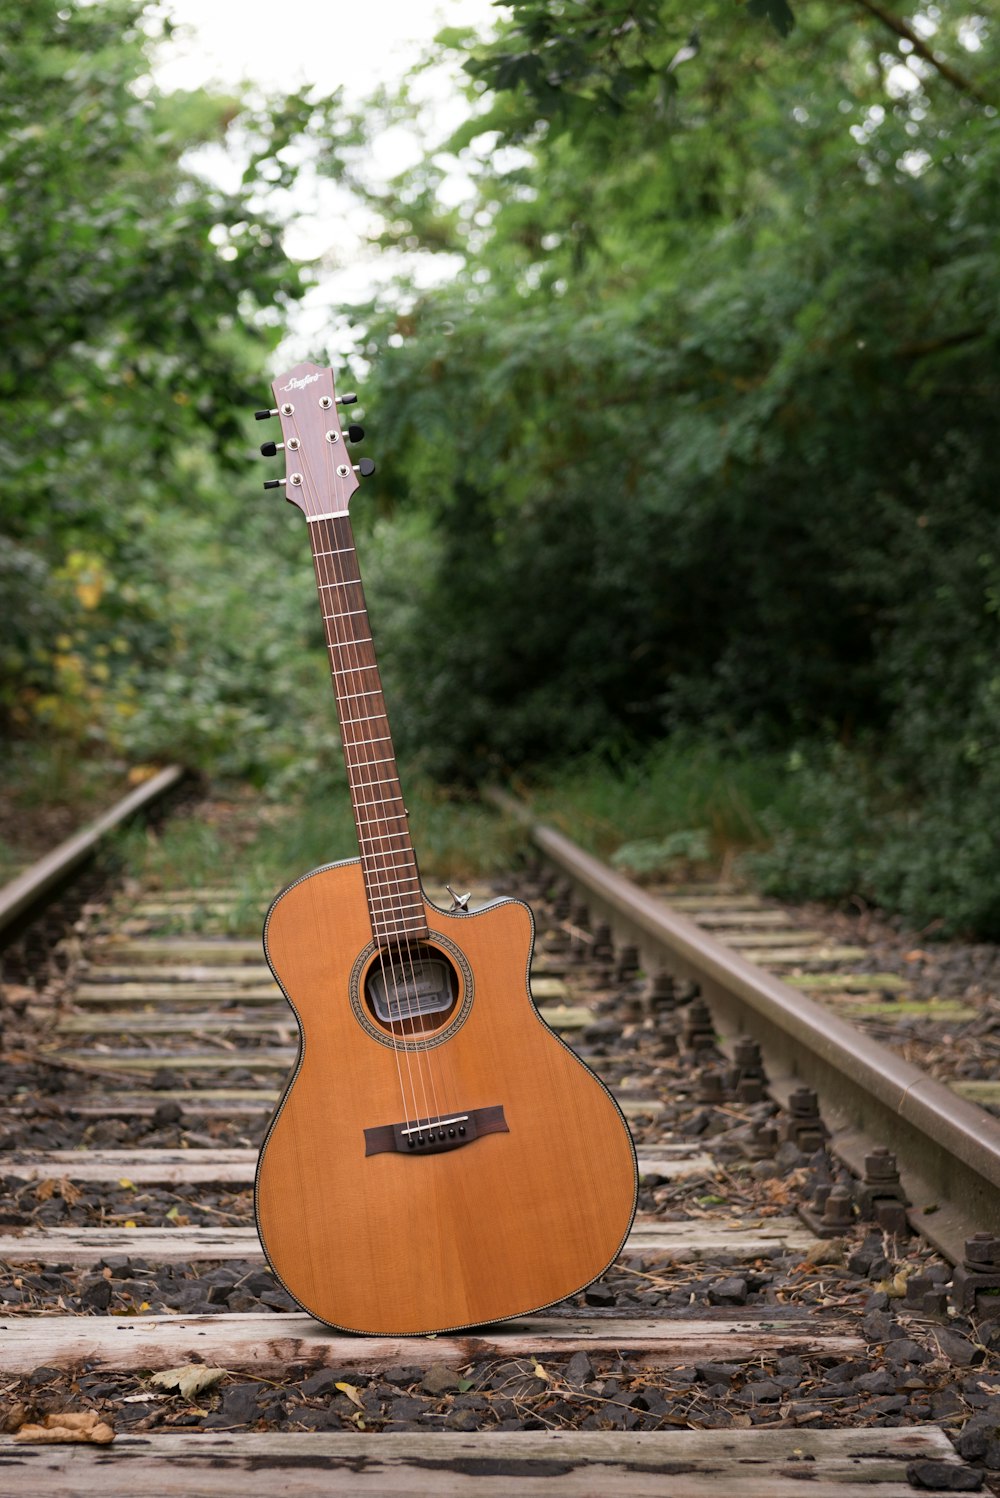 an acoustic guitar sitting on a train track